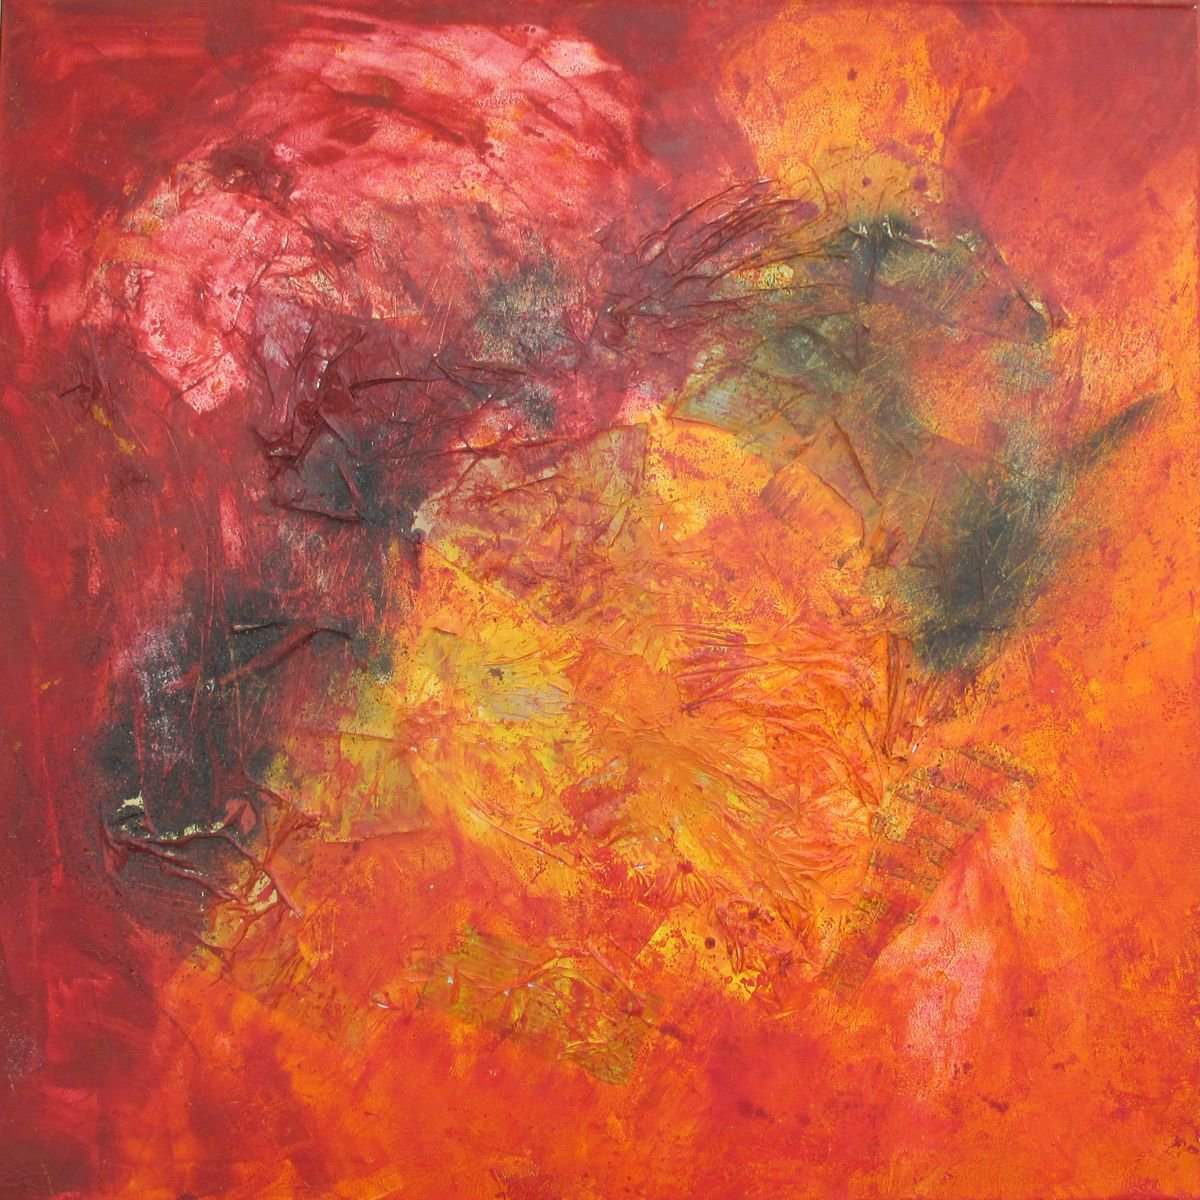 Vulcano on fire abstract red - informel collage painting xl 39x39 inch by Sonja Zeltner-Muller